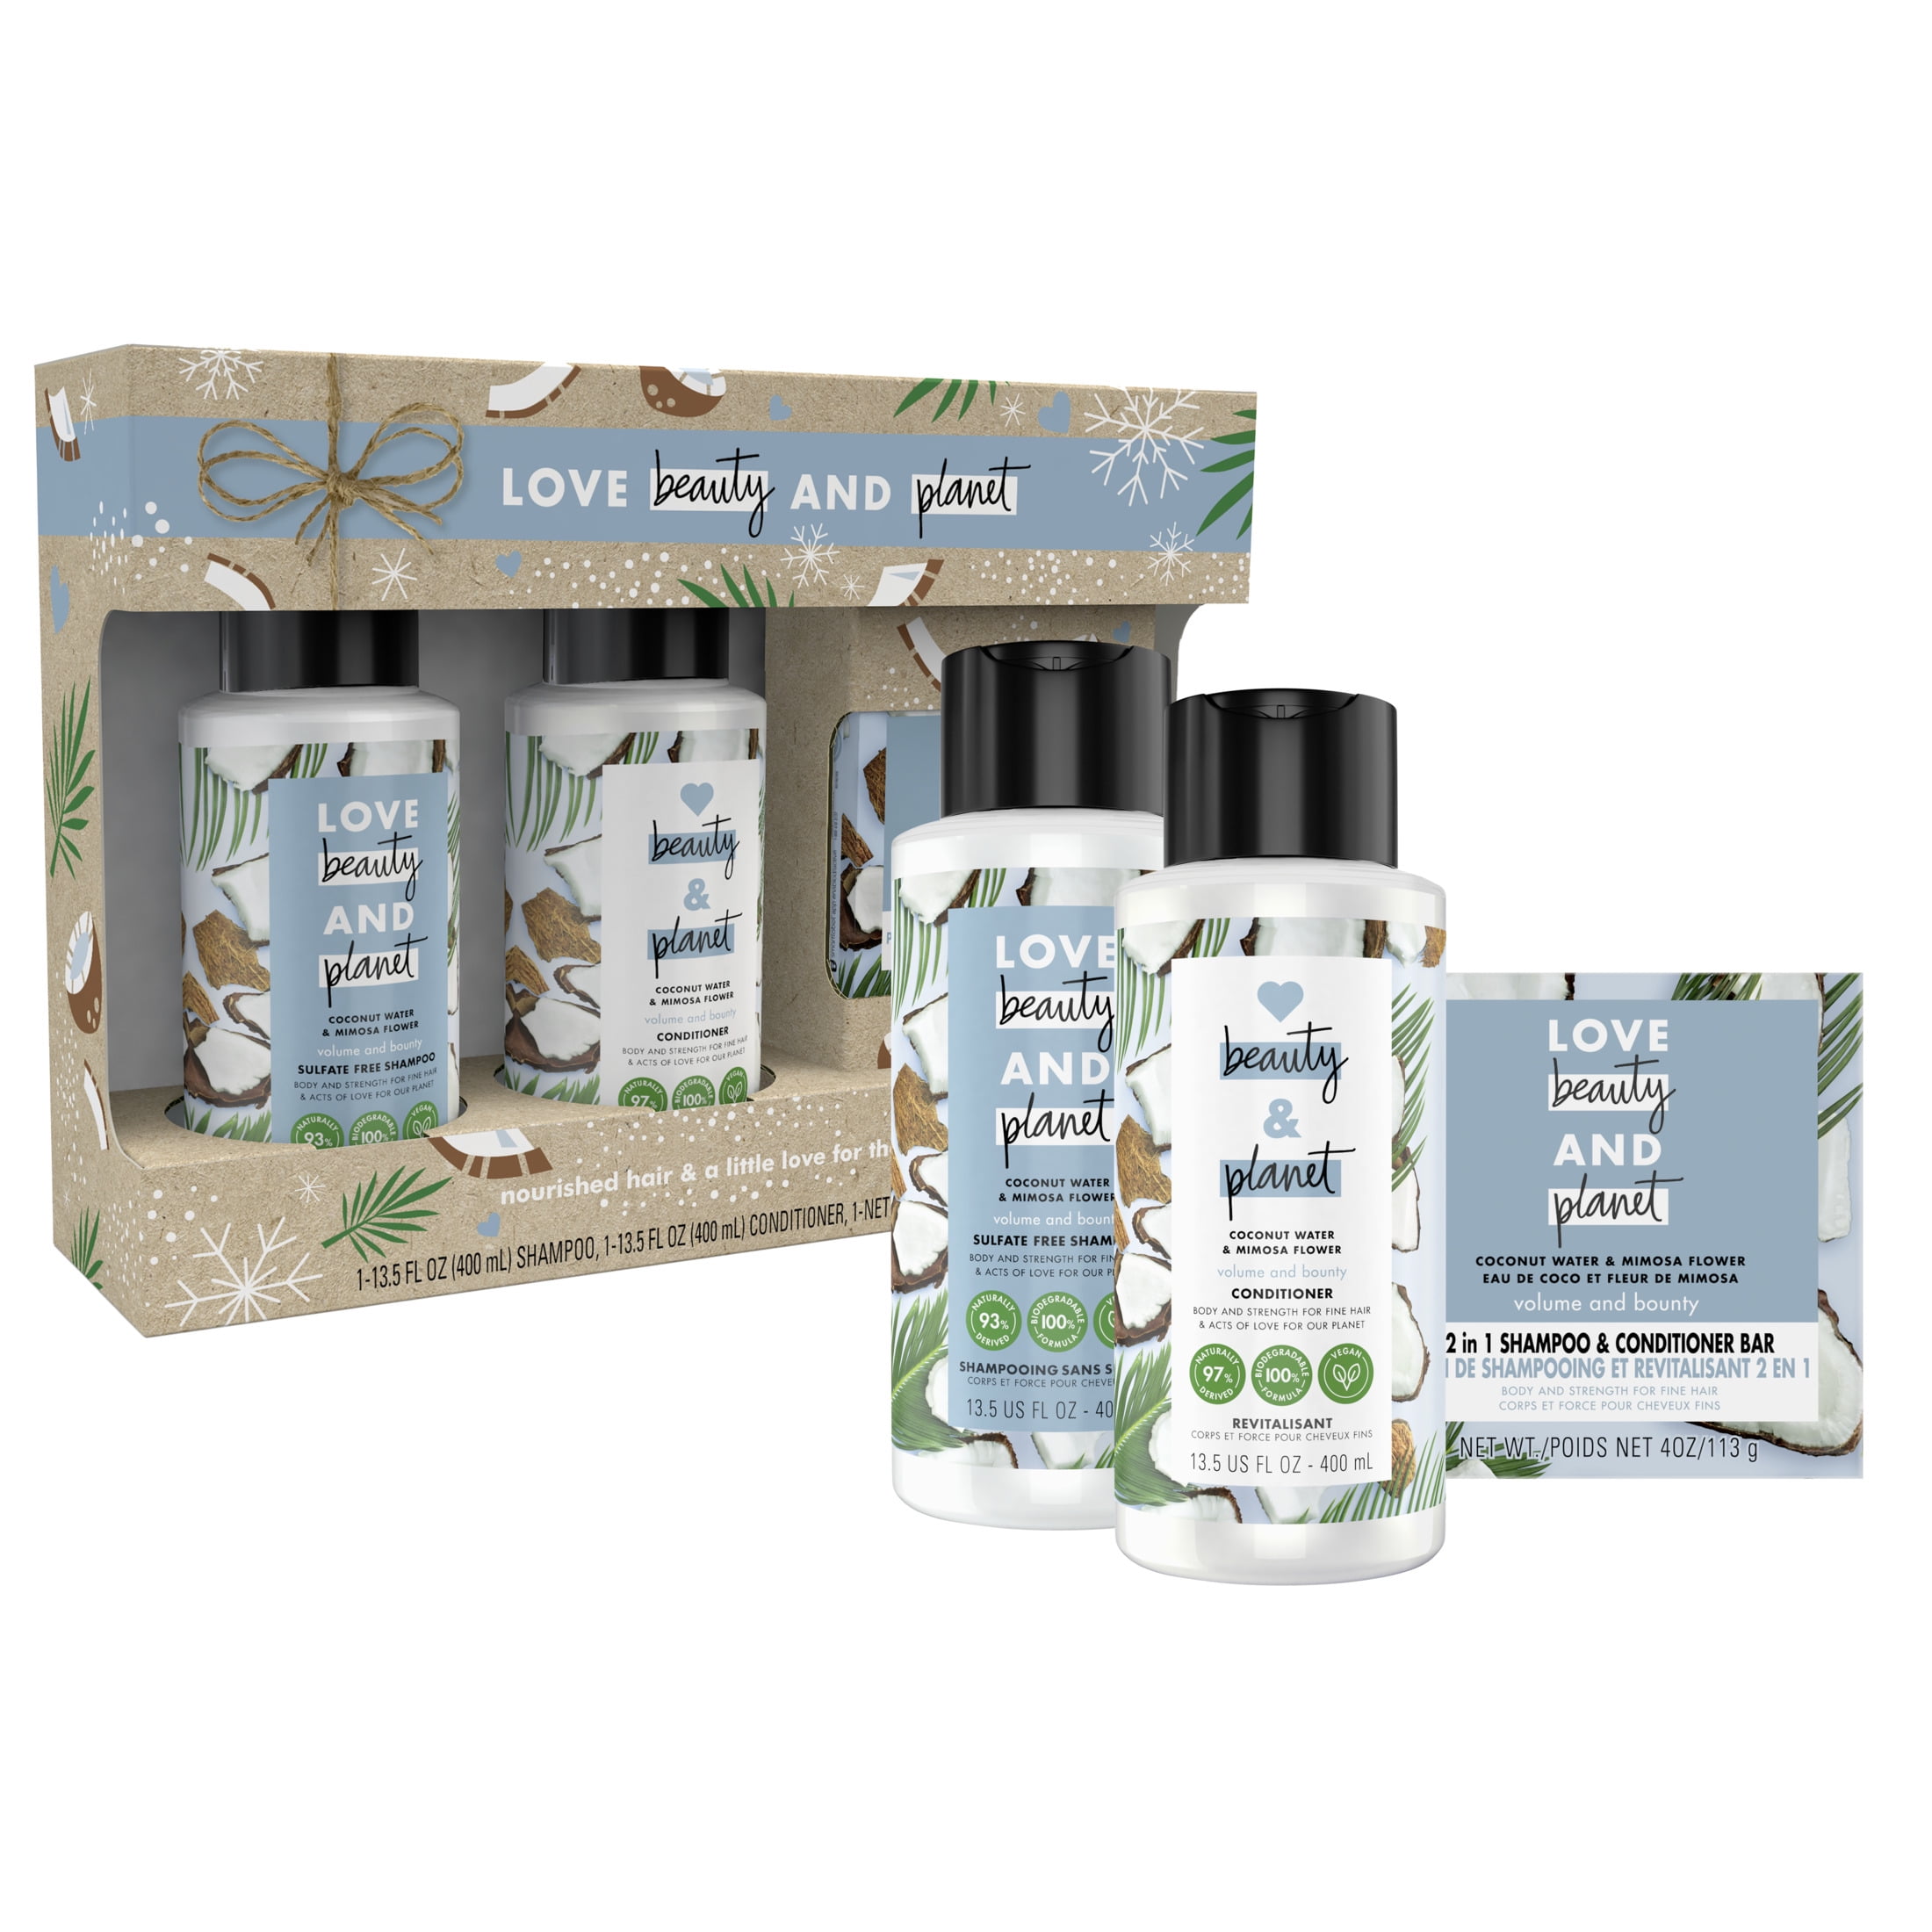 ($18 VALUE) Love Beauty and Planet Coconut Water & Mimosa Flower Hair Care Gift Set, 3 Count